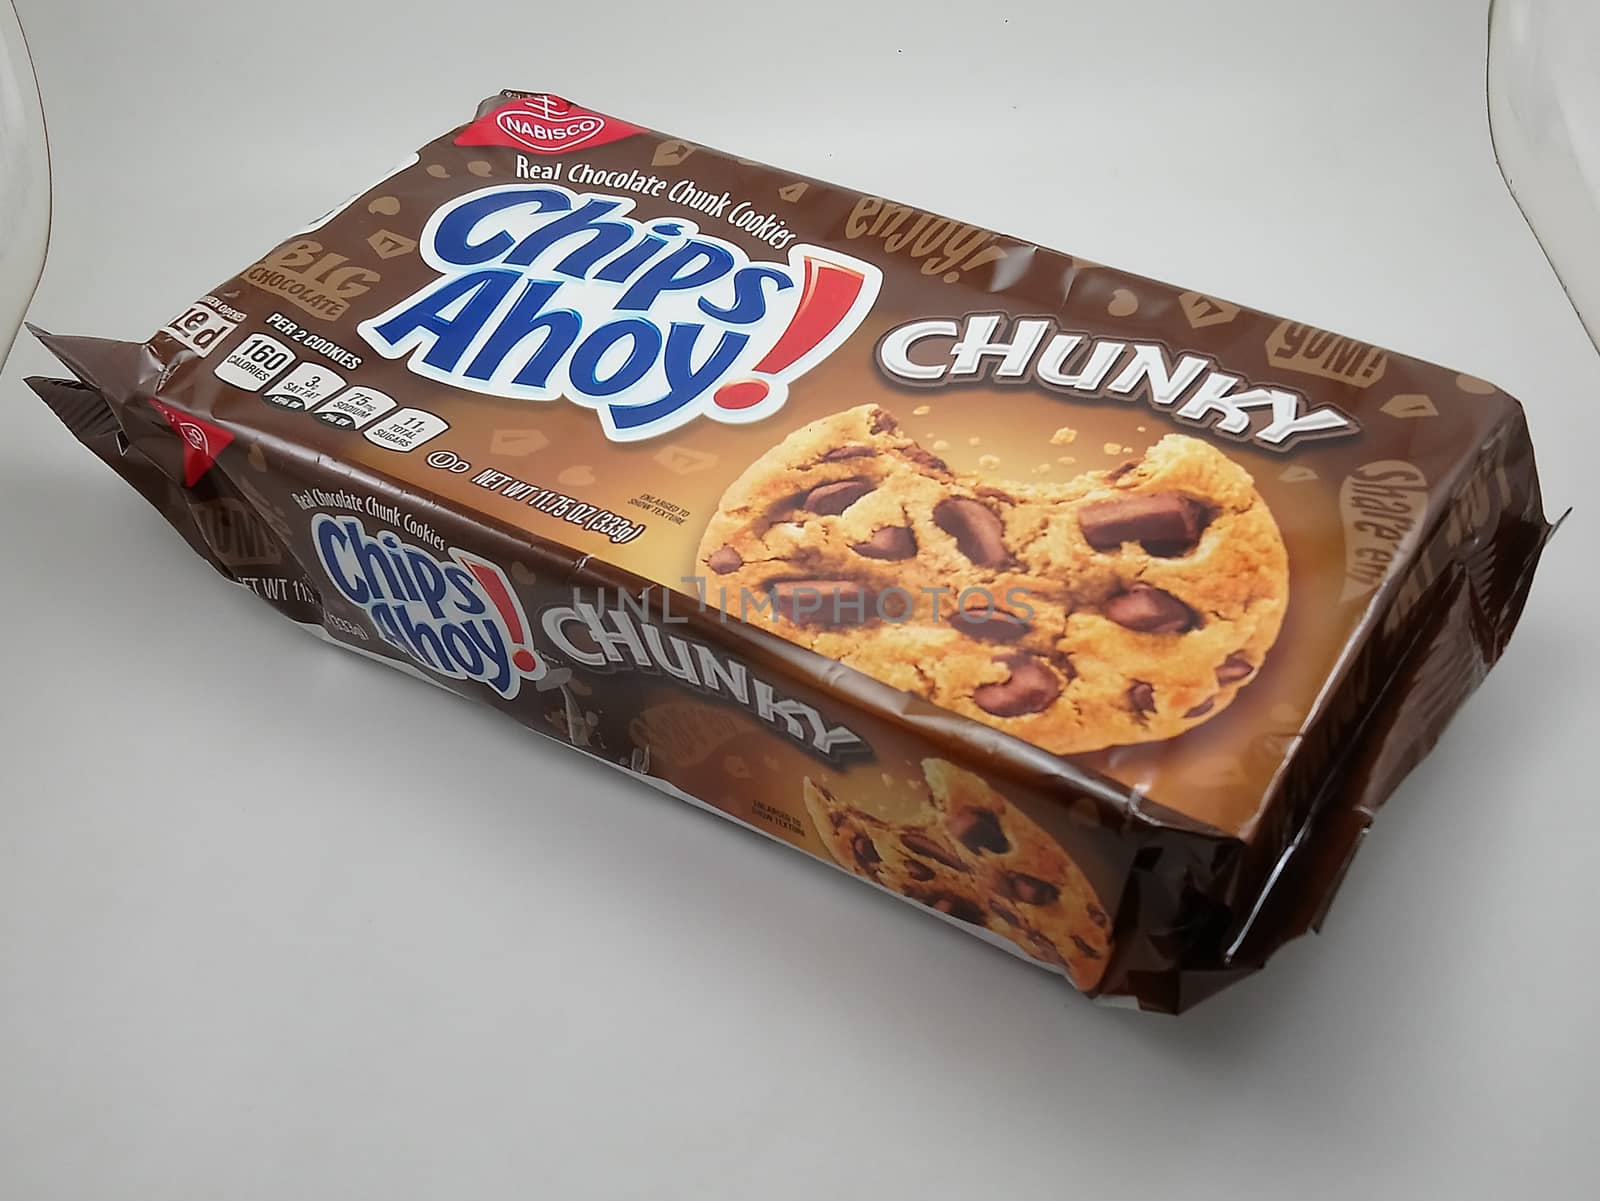 MANILA, PH - SEPT 24 - Chips ahoy chunky cookies on September 24, 2020 in Manila, Philippines.